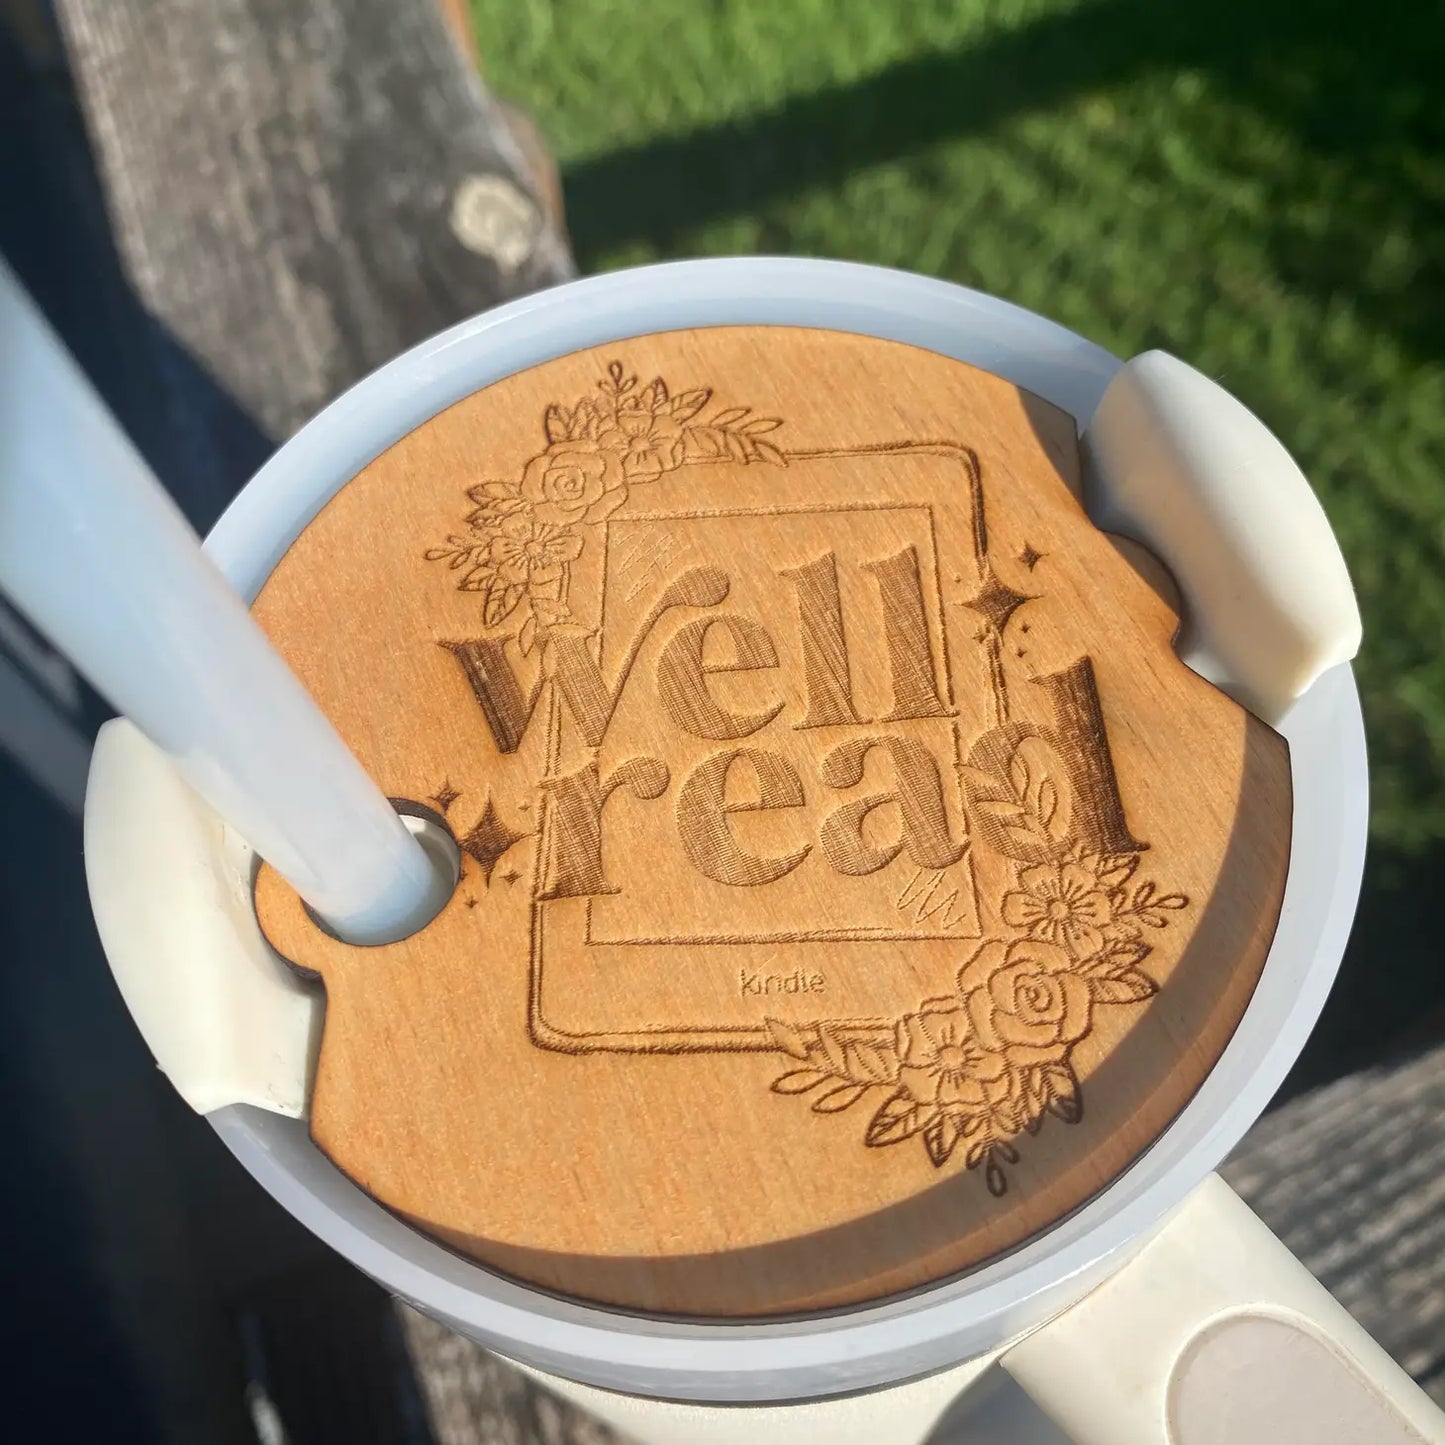 "Well Read" Tumbler Topper